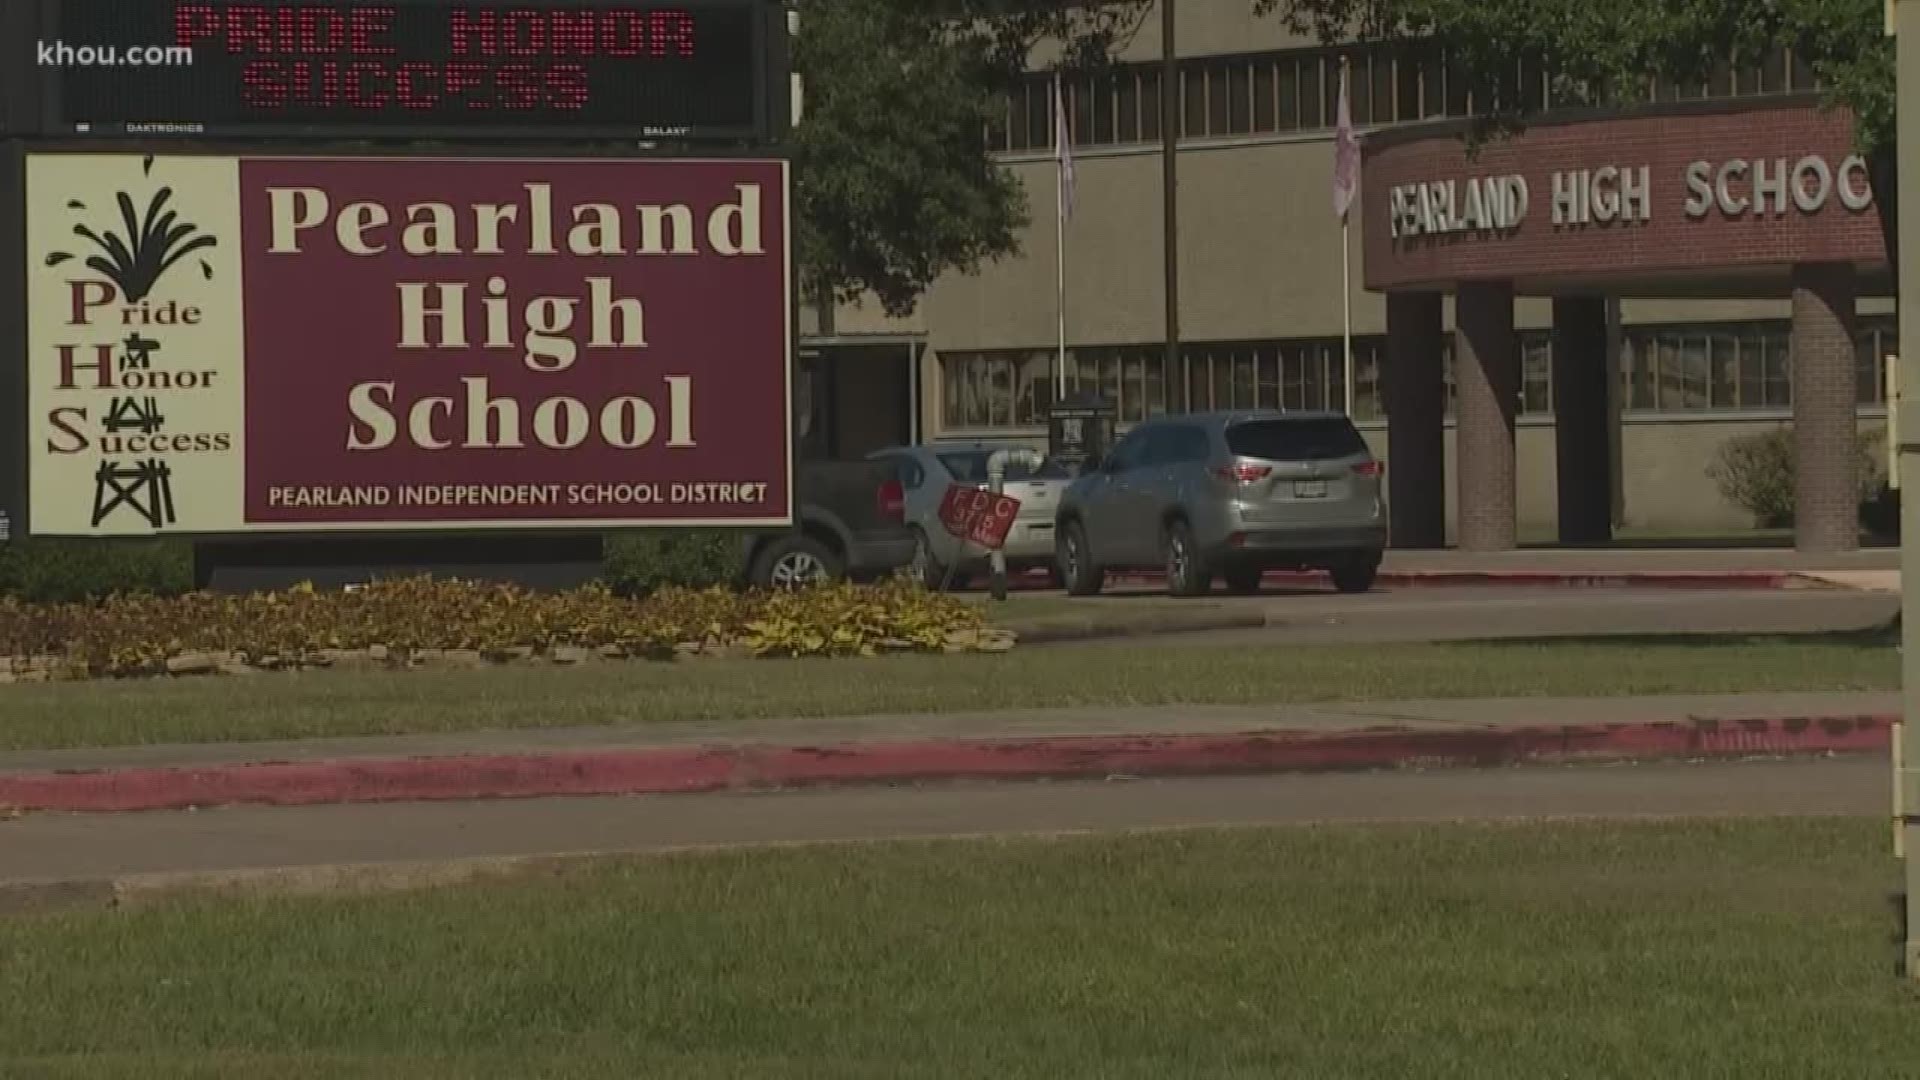 Studies show high schoolers need more sleep, so school start times may be on the move in Pearland.